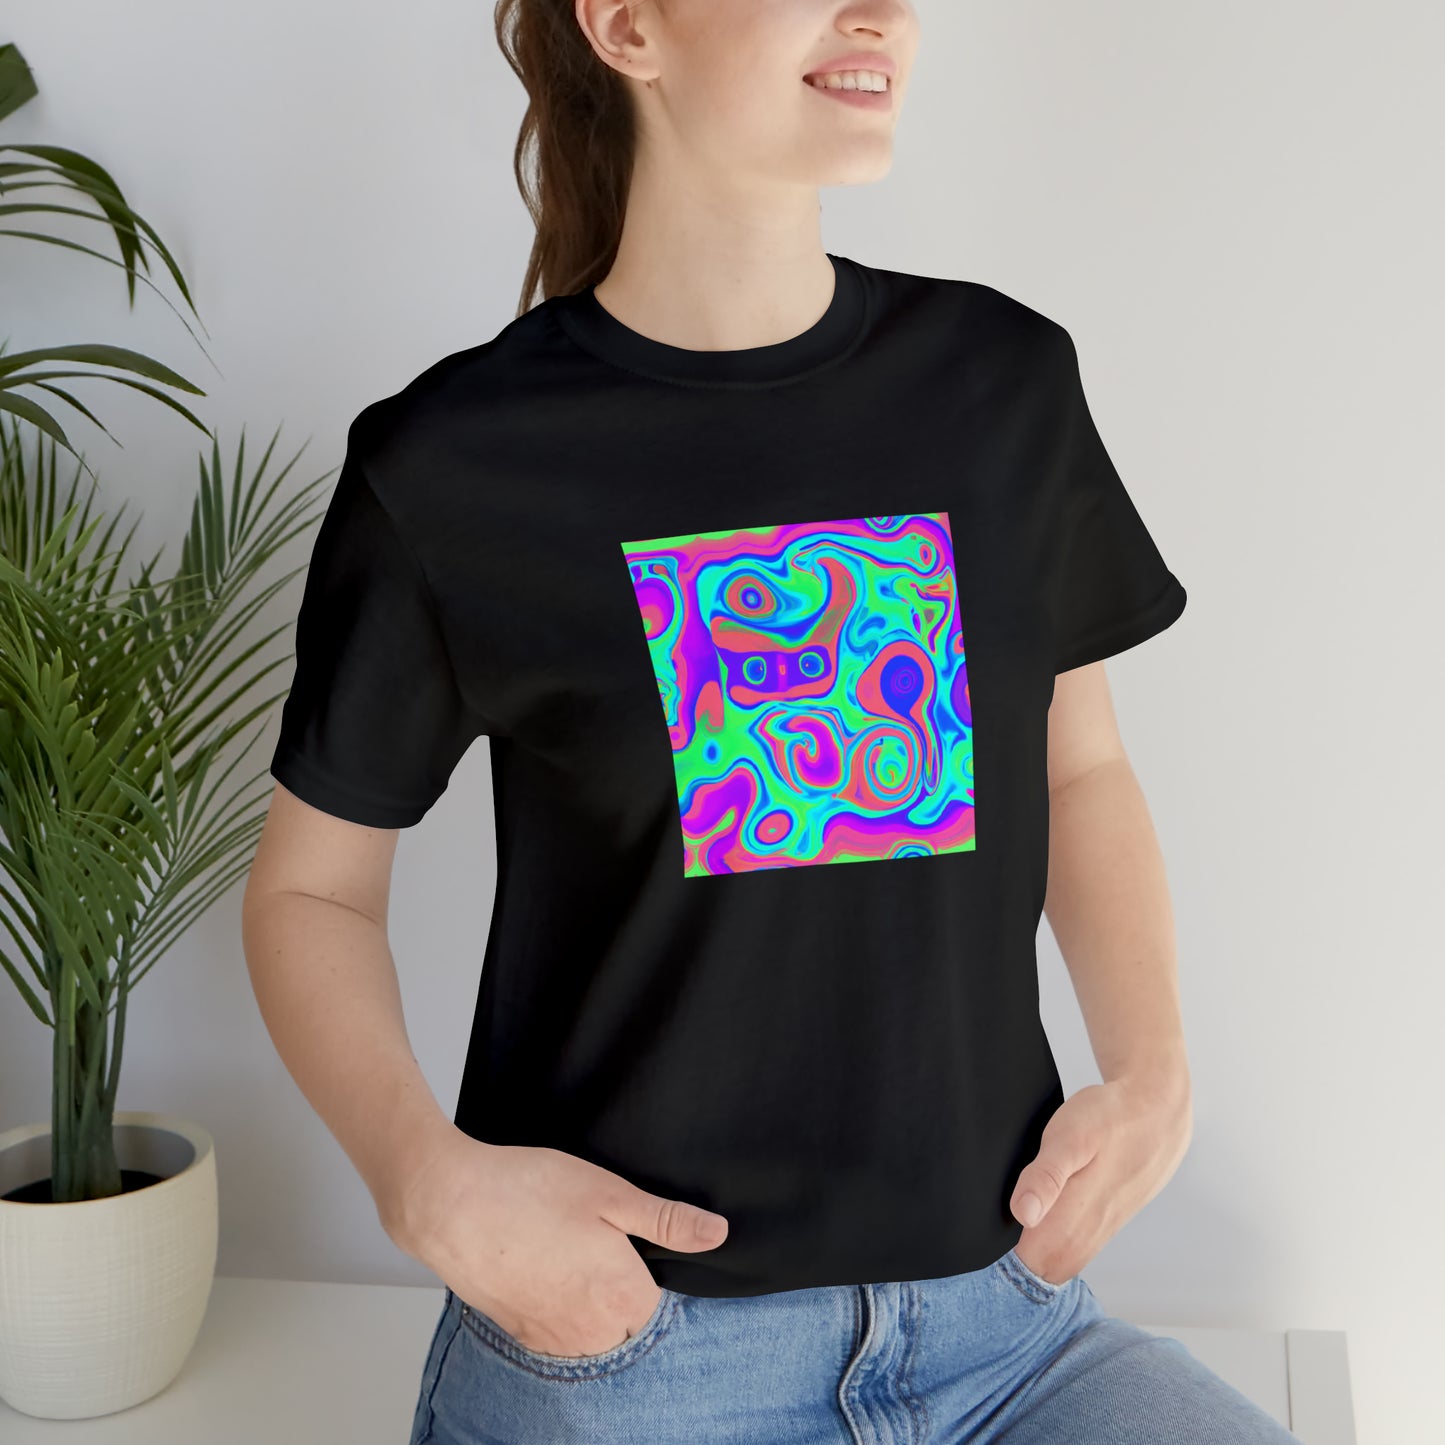 Miles Minnelli - - Psychedelic Trippy Pattern Tee Shirt